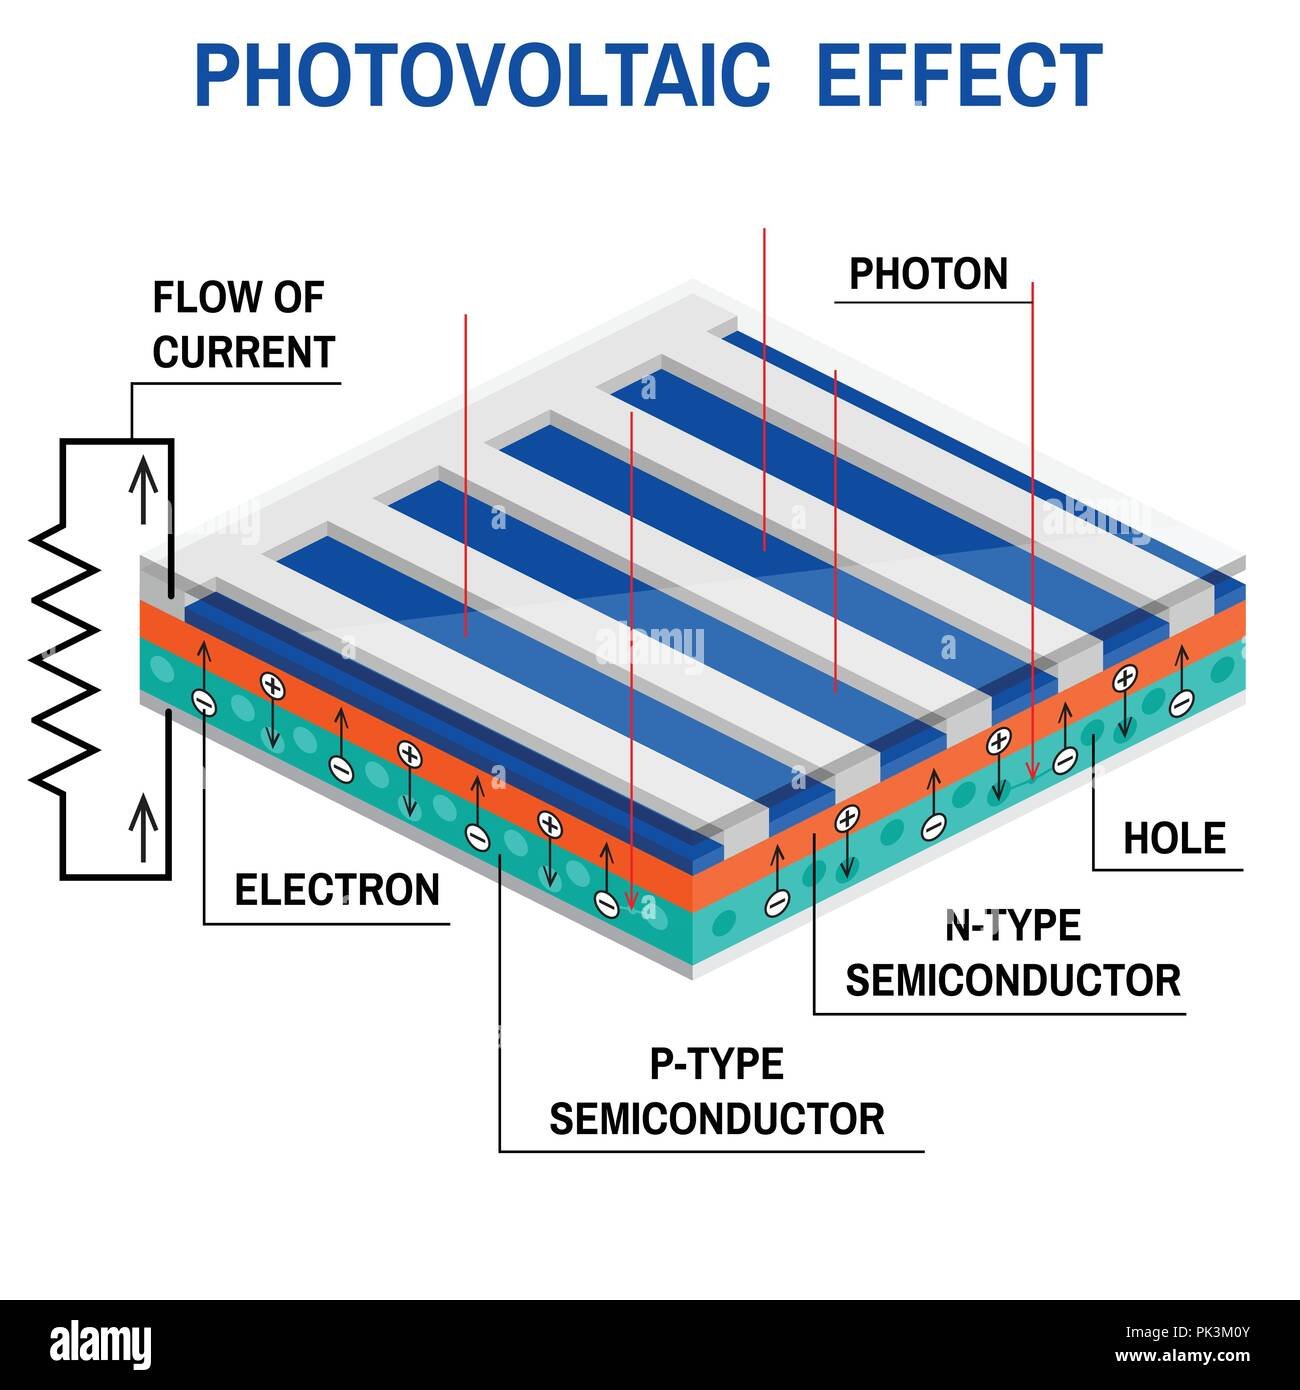 why photovoltaic effect occur › › Basengreen Energy